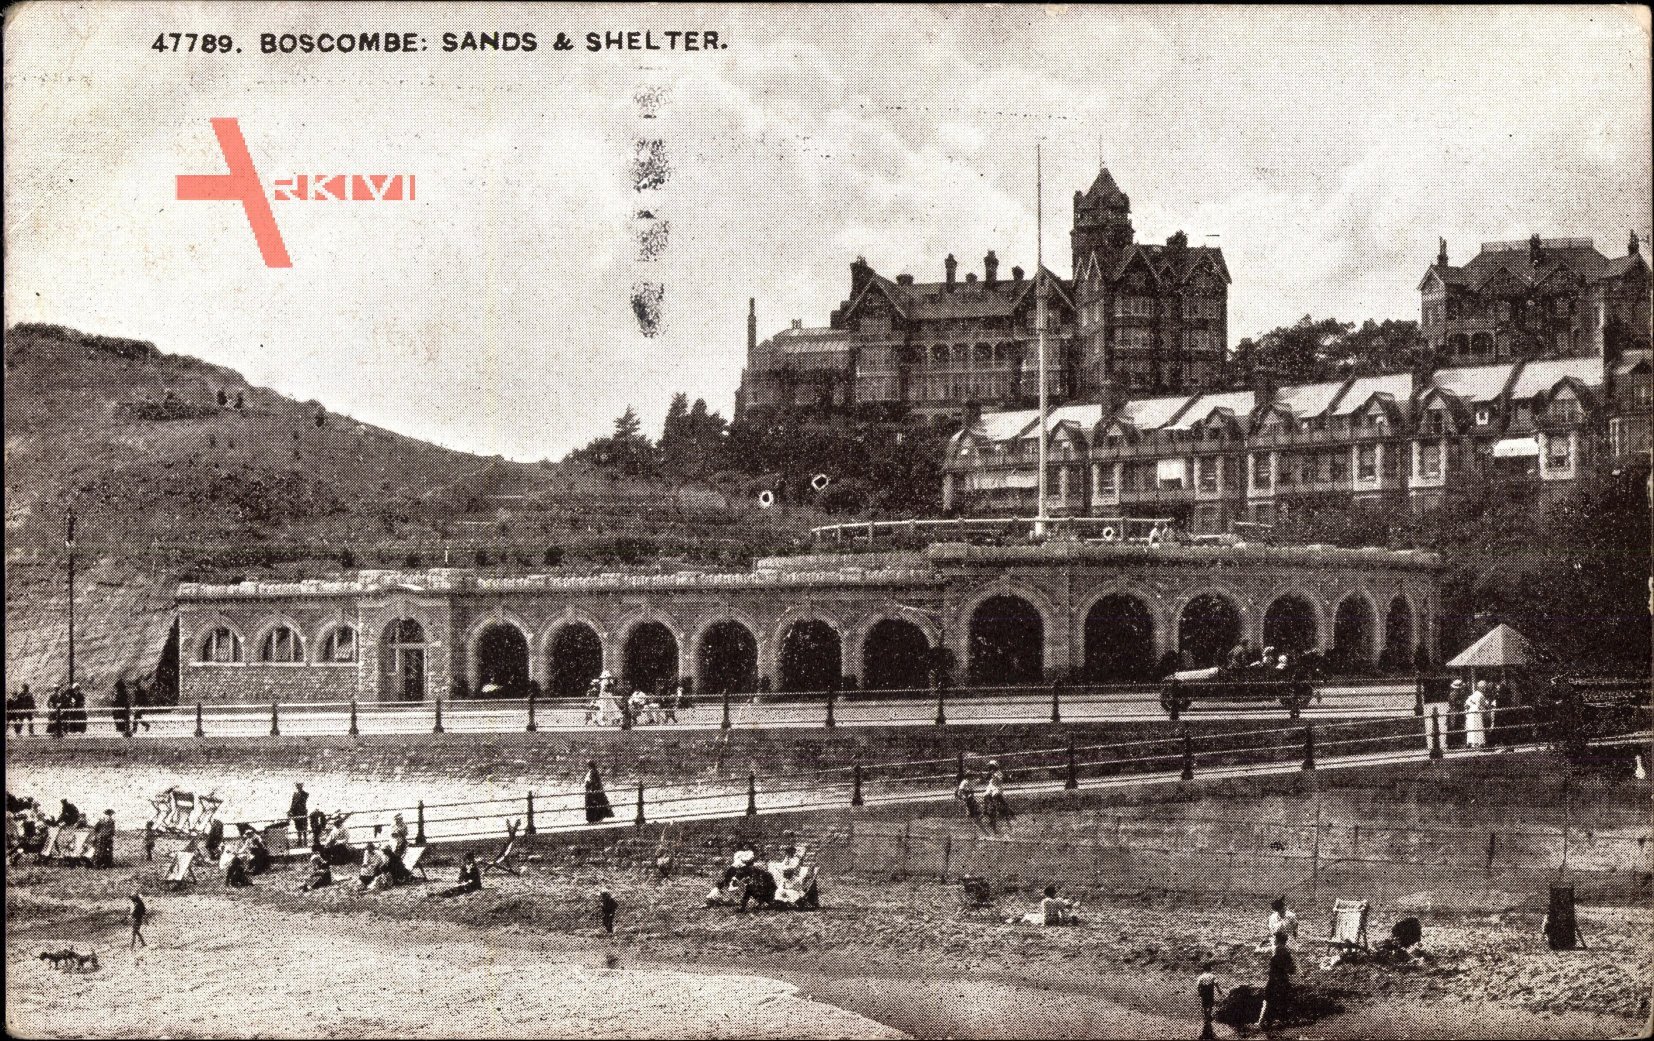 Boscombe South West, Sands and Shelter, Strand, Unterstand